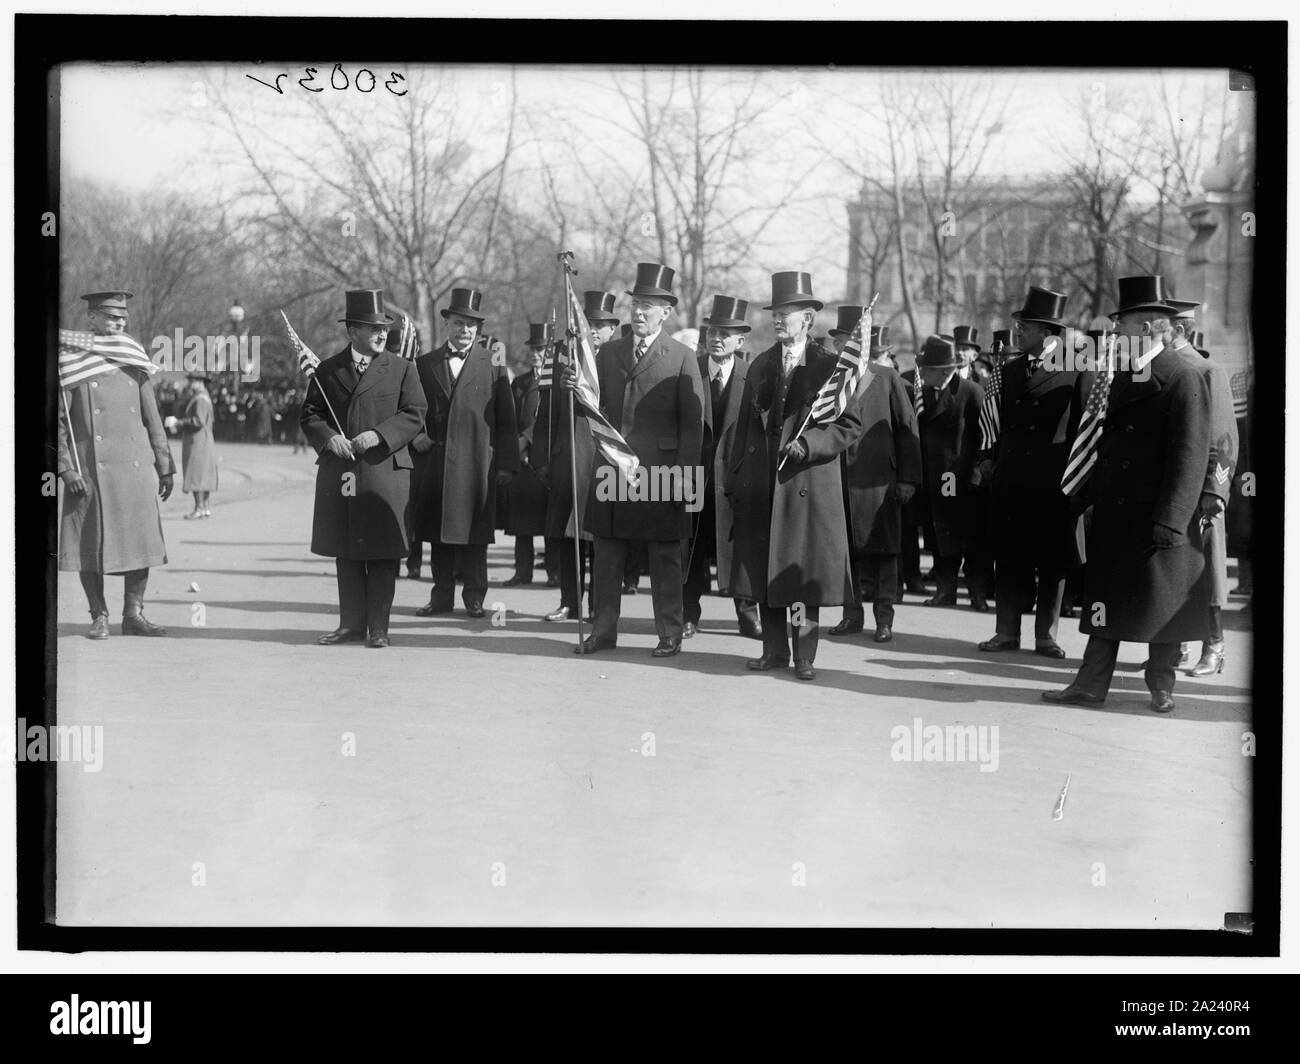 PARADES WELCOME HOME PARADE FOR PRESIDENT WILSON; HARPER, ROBERT N., D.C. BANKER; GUDE, WILLIAM F., OF D.C. Stock Photo